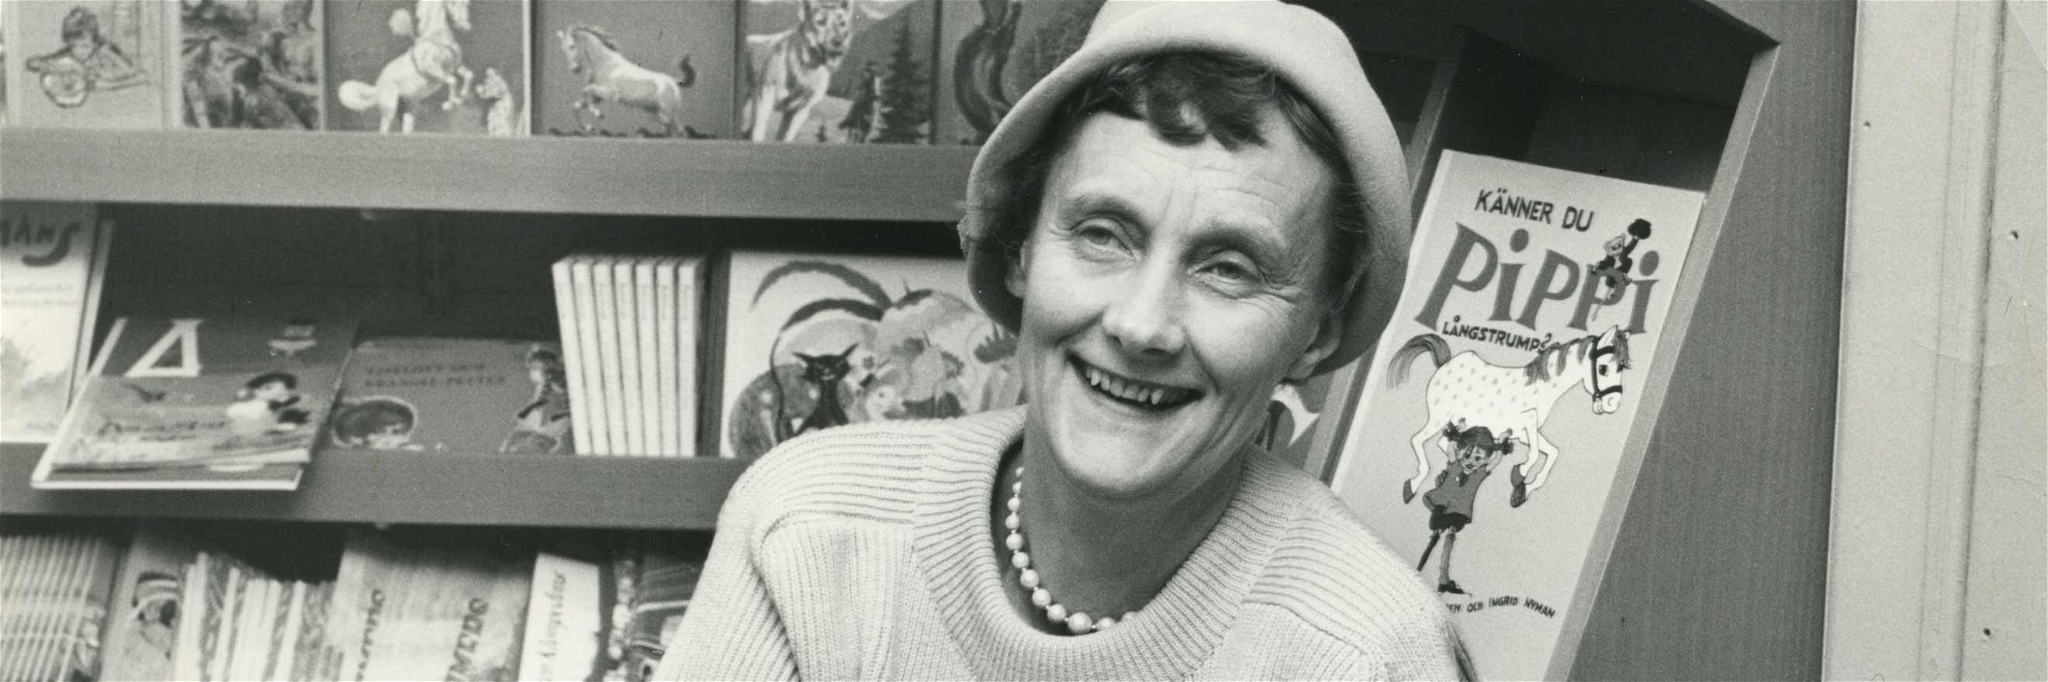 Astrid Lindgren's literary career did not begin until she was 37 years old.